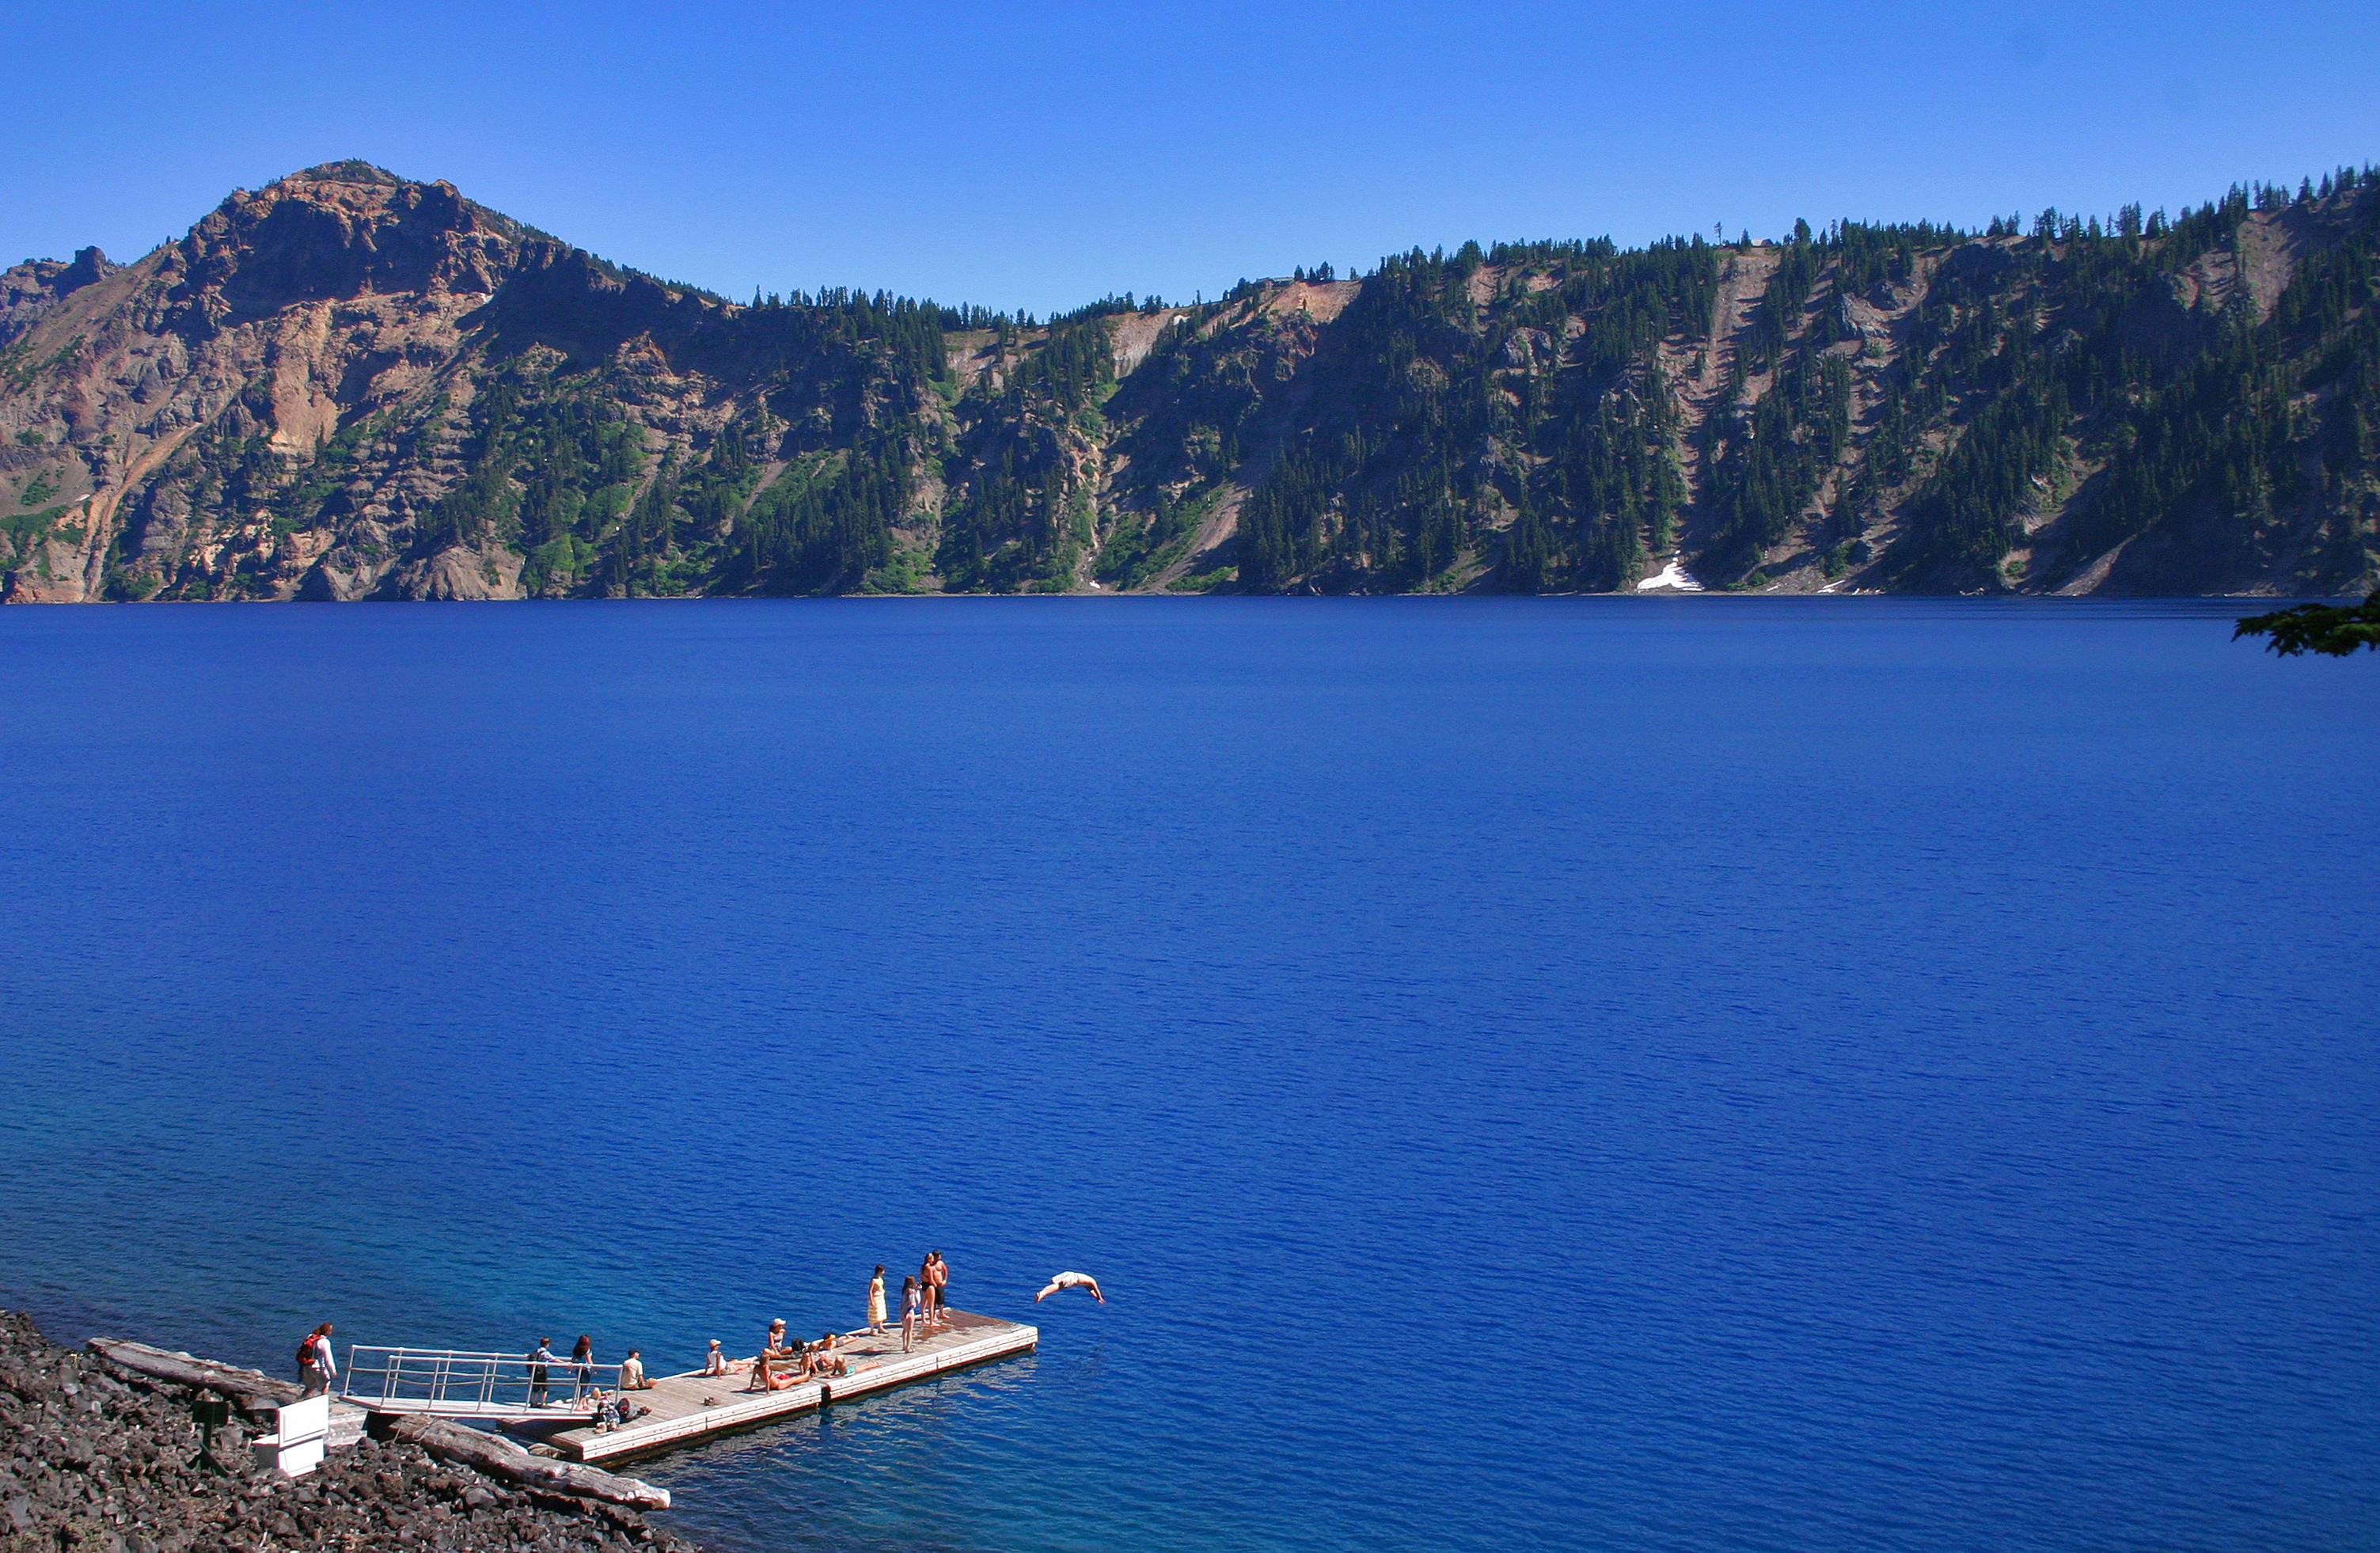 Description From Crater Lake Pictures Wallpaper